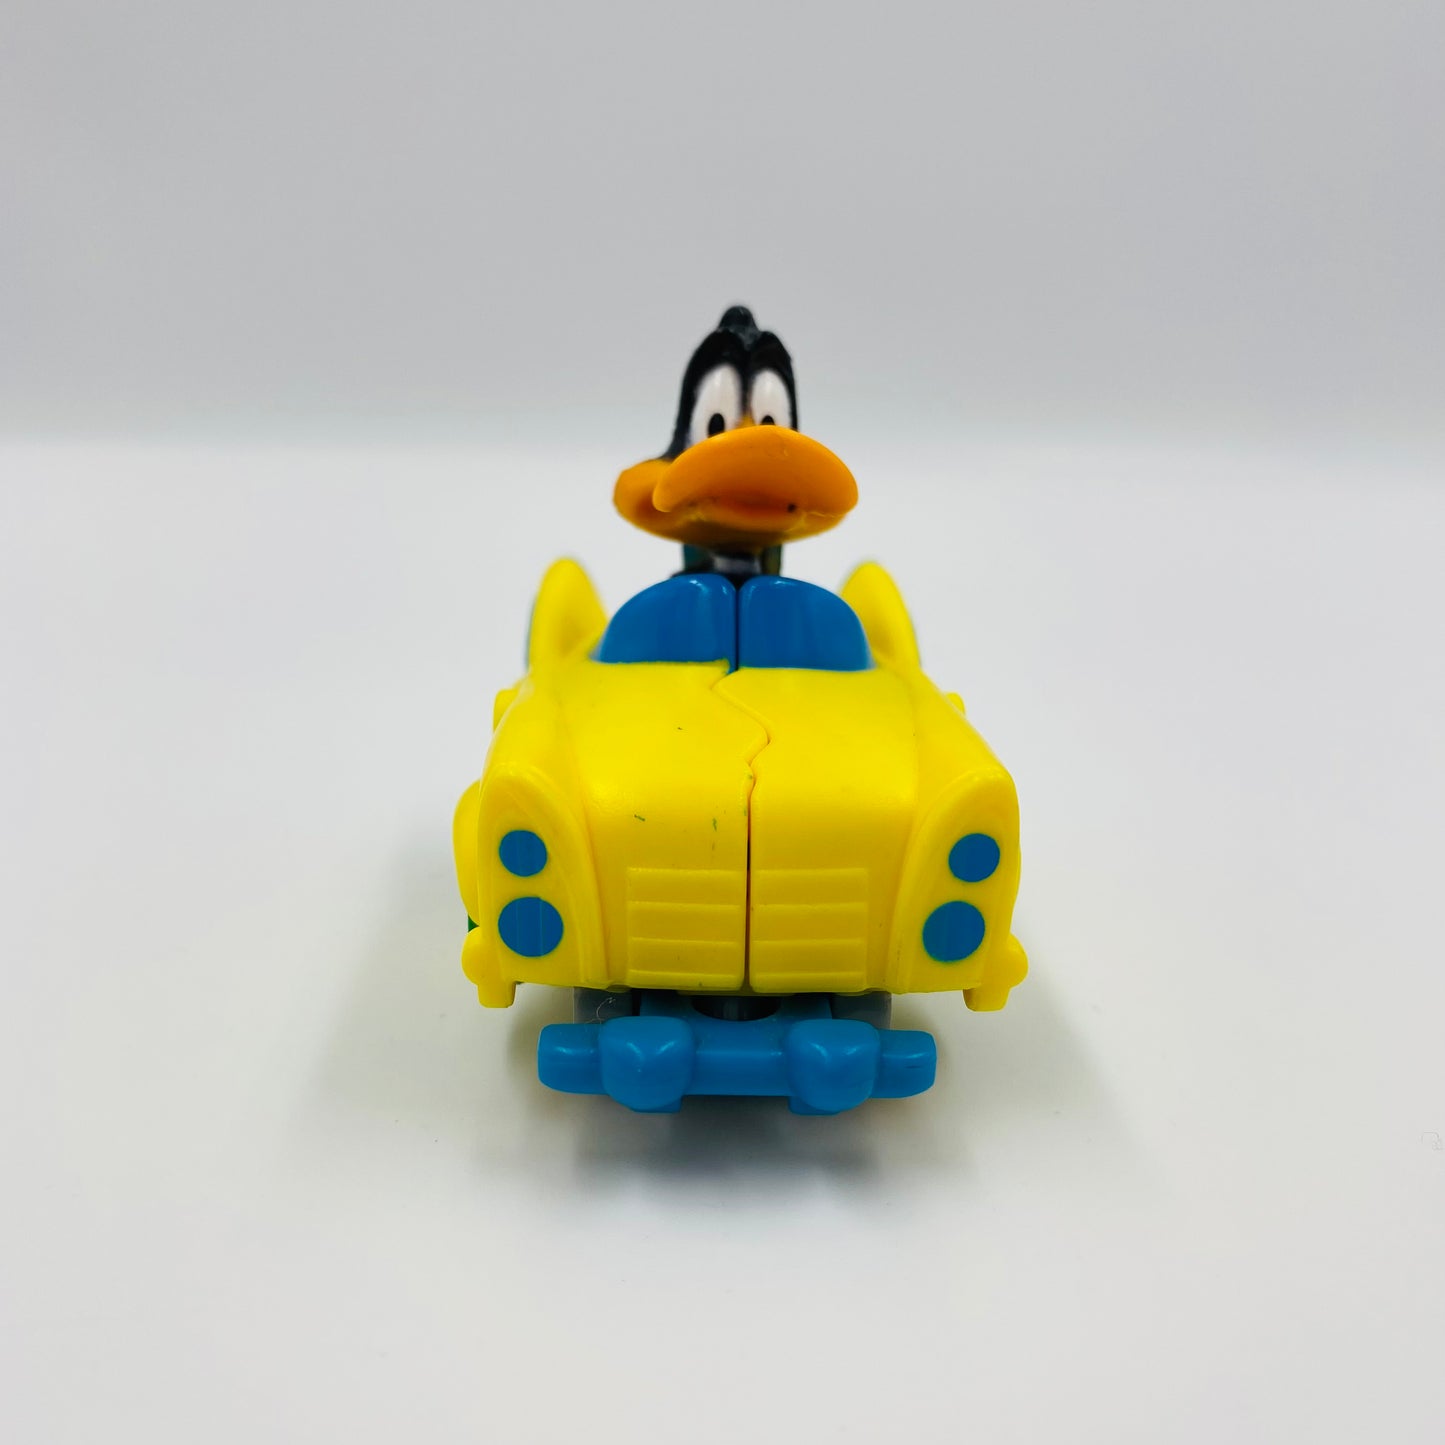 Looney Tunes Quack-Up Cars complete set of 5 McDonald's Happy Meal toys (1992) bagged & loose